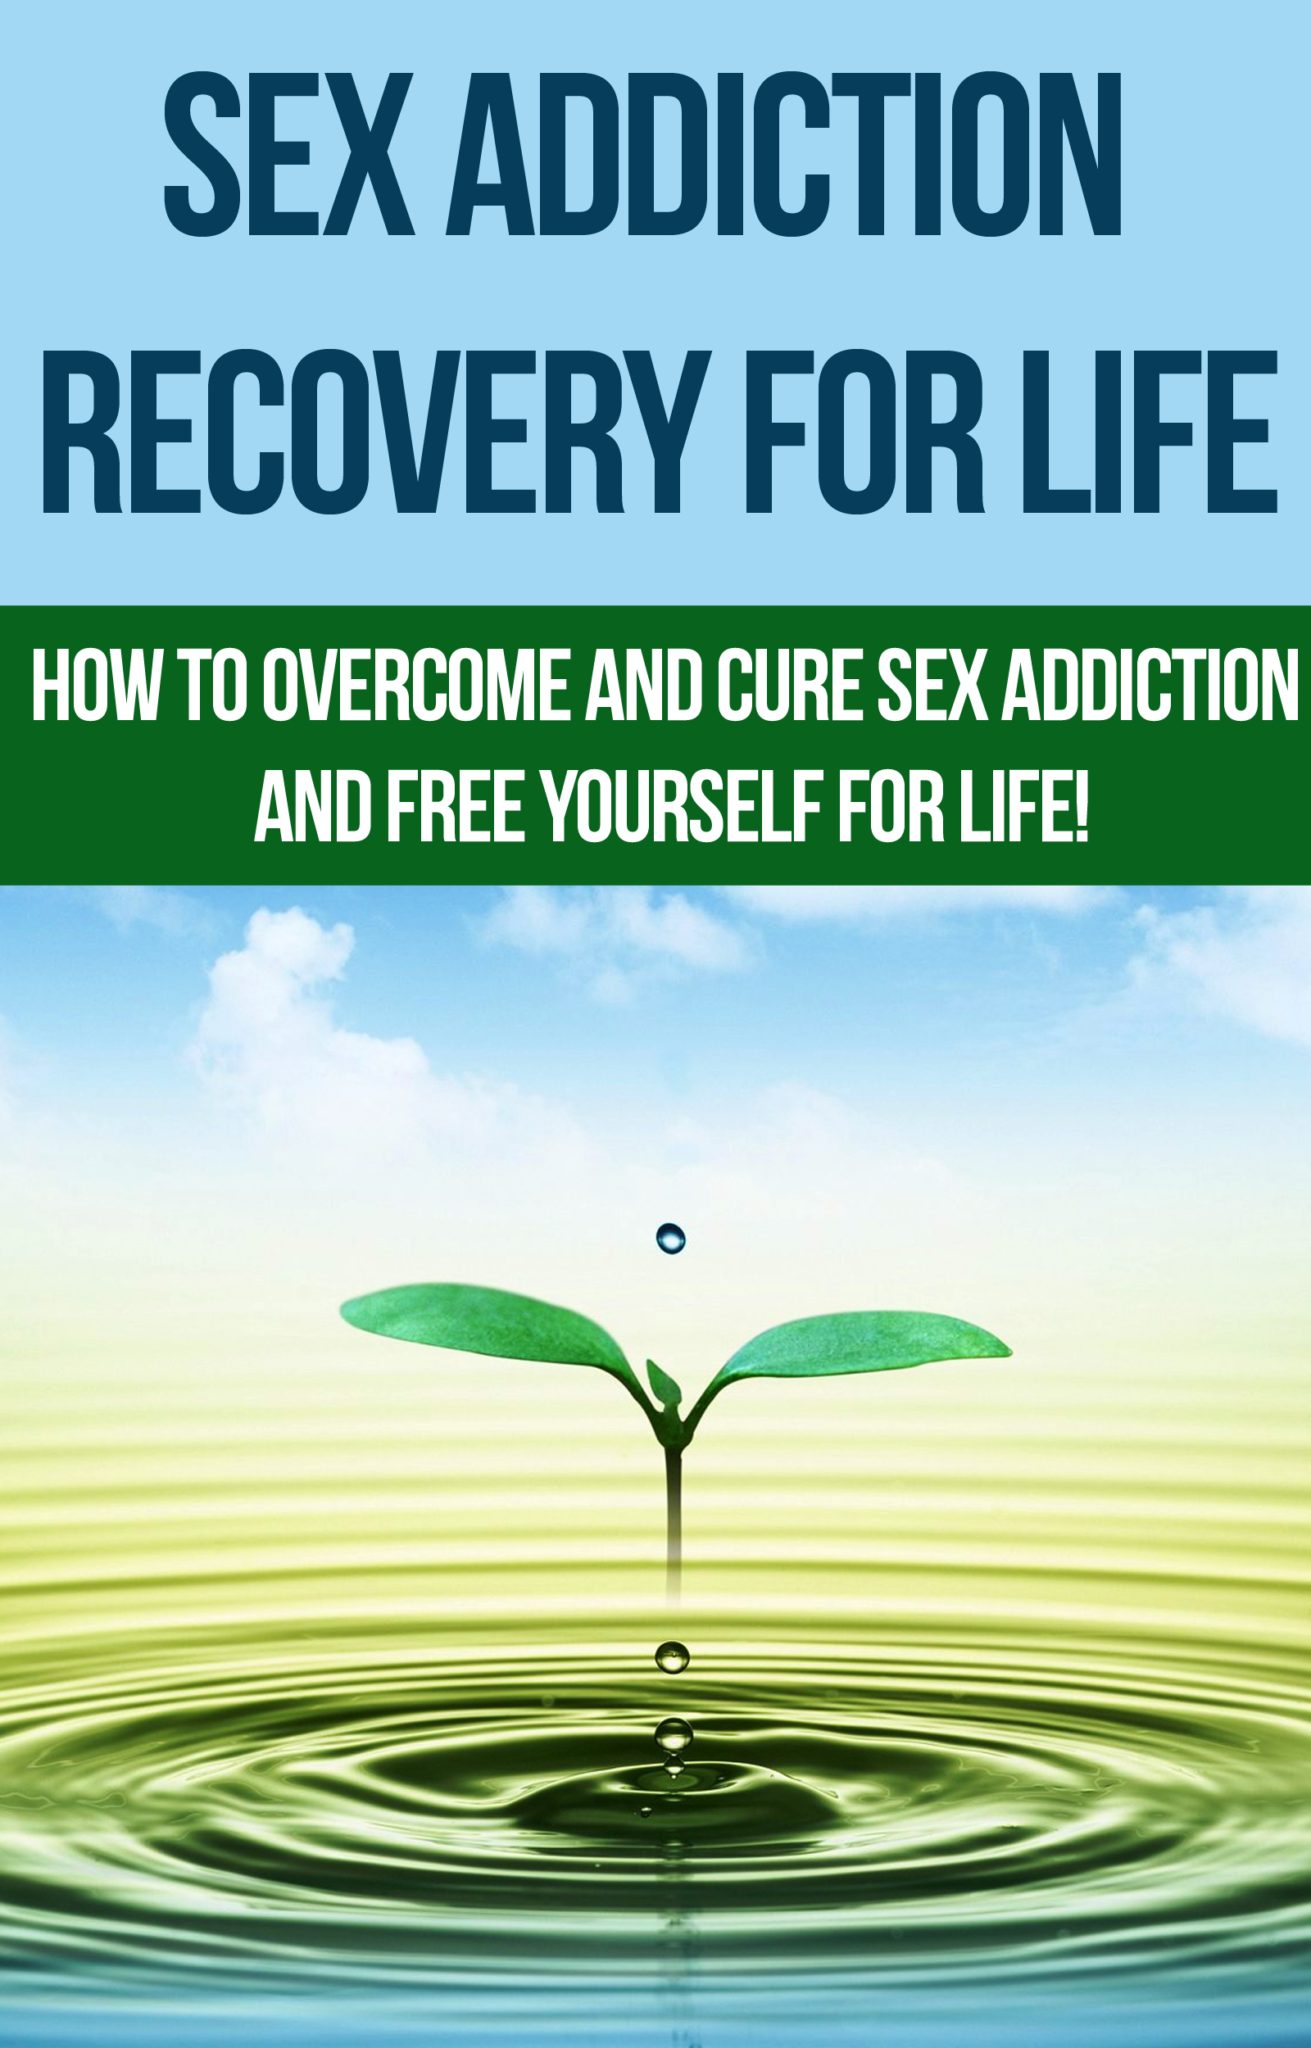 Sex Addiction Recovery For Life – how to overcome and cure sex addiction and free yourself for life by Yujin Lee